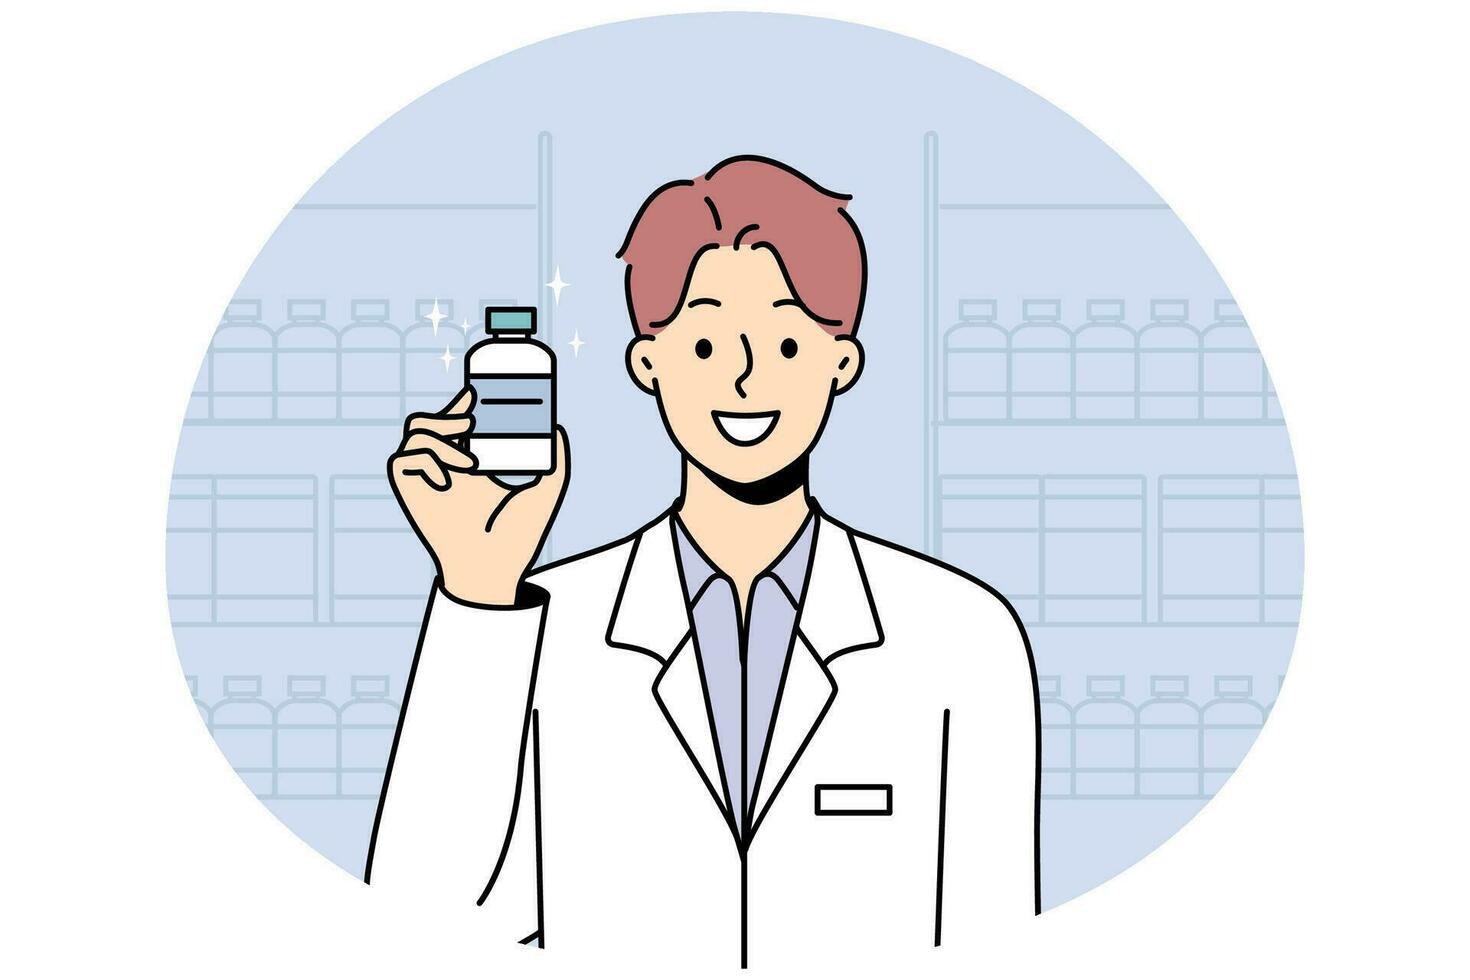 Smiling male pharmacist in medical uniform hold bottle in hands. Happy man specialist or professional recommend medication or drug. Healthcare and medicine. Vector illustration.